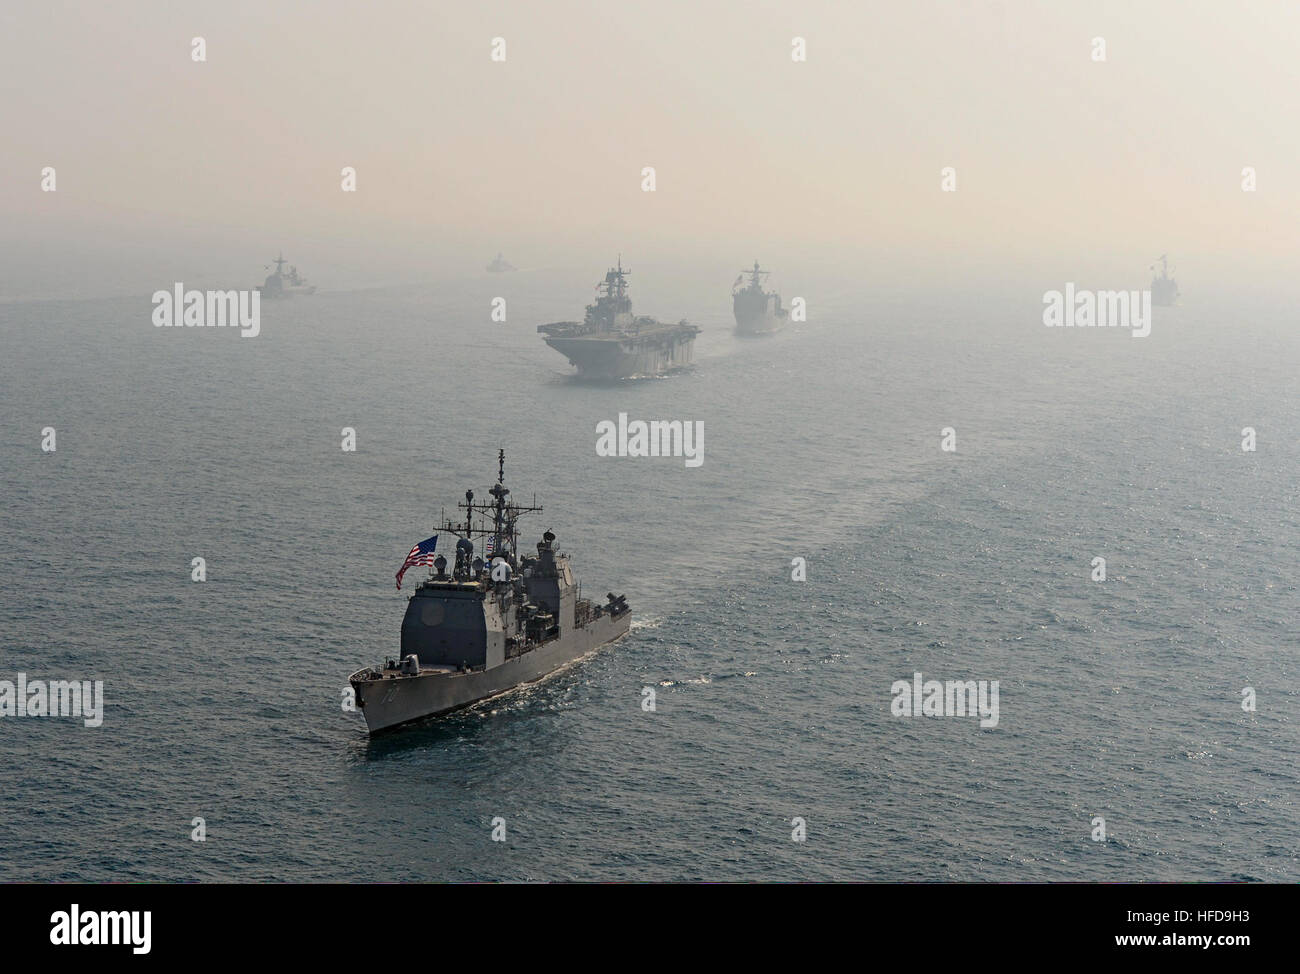 The guided missile cruiser USS Lake Erie (CG 70), front, transits the East China Sea with ships assigned to the Bonhomme Richard Amphibious Ready Group and Republic of Korea Navy ships during a photo exercise March 27, 2014. The Lake Erie was participating in exercise Ssang Yong 14, a combined U.S.-South Korean combat readiness and joint/combined interoperability exercise designed to advance South Korean command and control capabilities through amphibious operations. (DoD photo by Mass Communication Specialist 2nd Class Michael Achterling, U.S. Navy/Released) The guided missile cruiser USS Lak Stock Photo